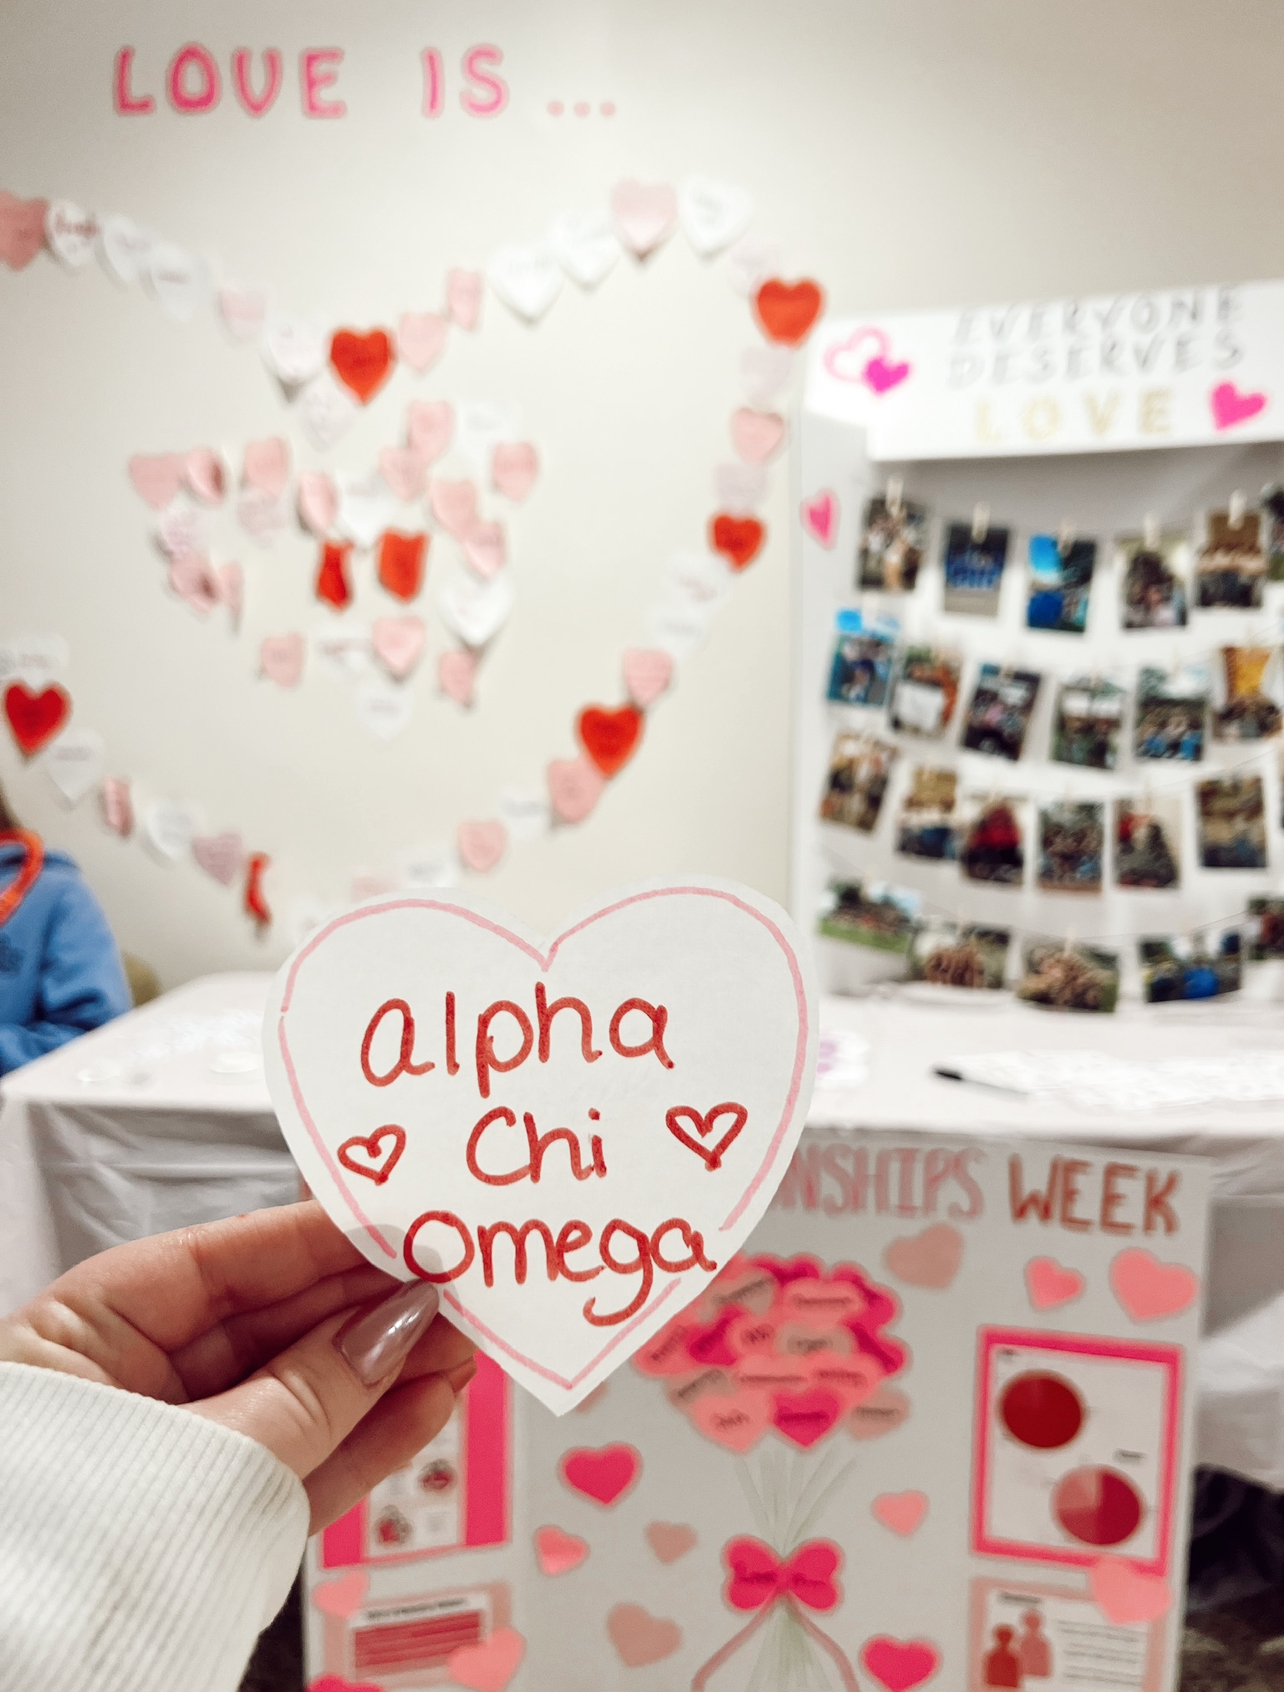 Alpha Chi Omega's healthy relationships table